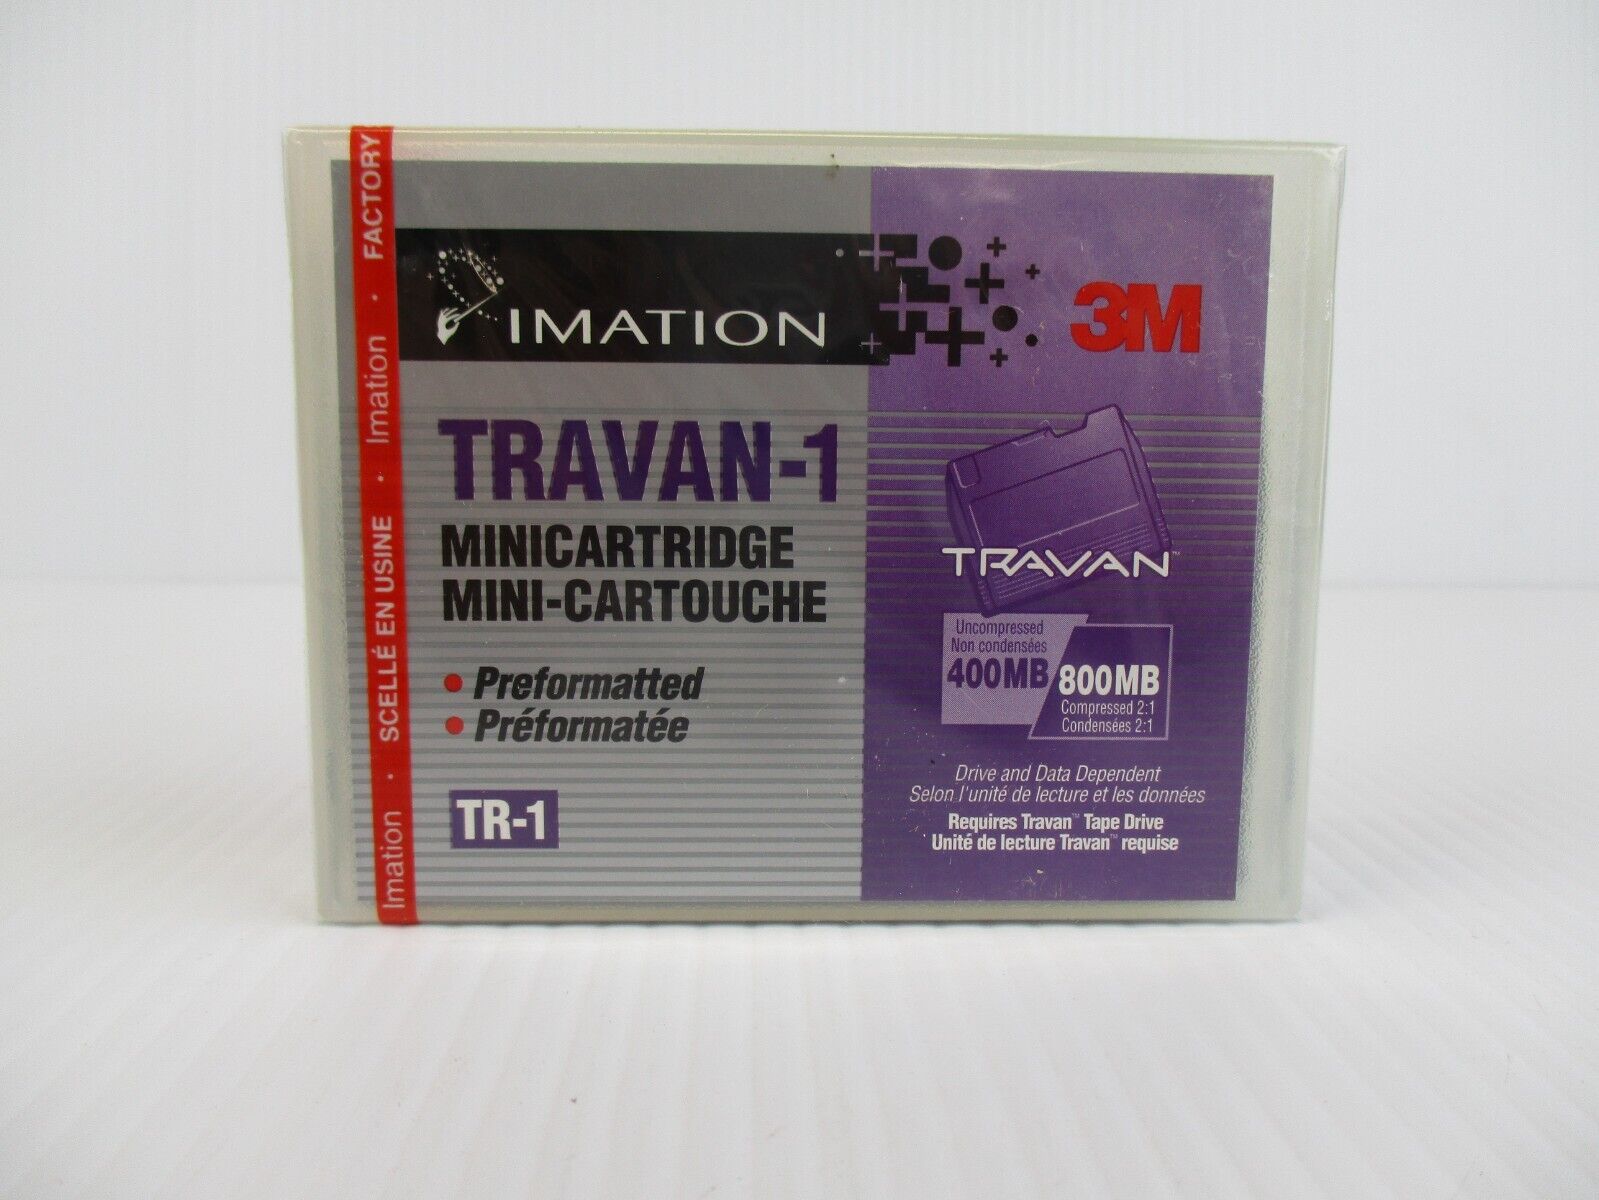 Imation 3M TR-1 TRAVAN-1 400MB/800MB Minicartridge New Sealed 14 Available